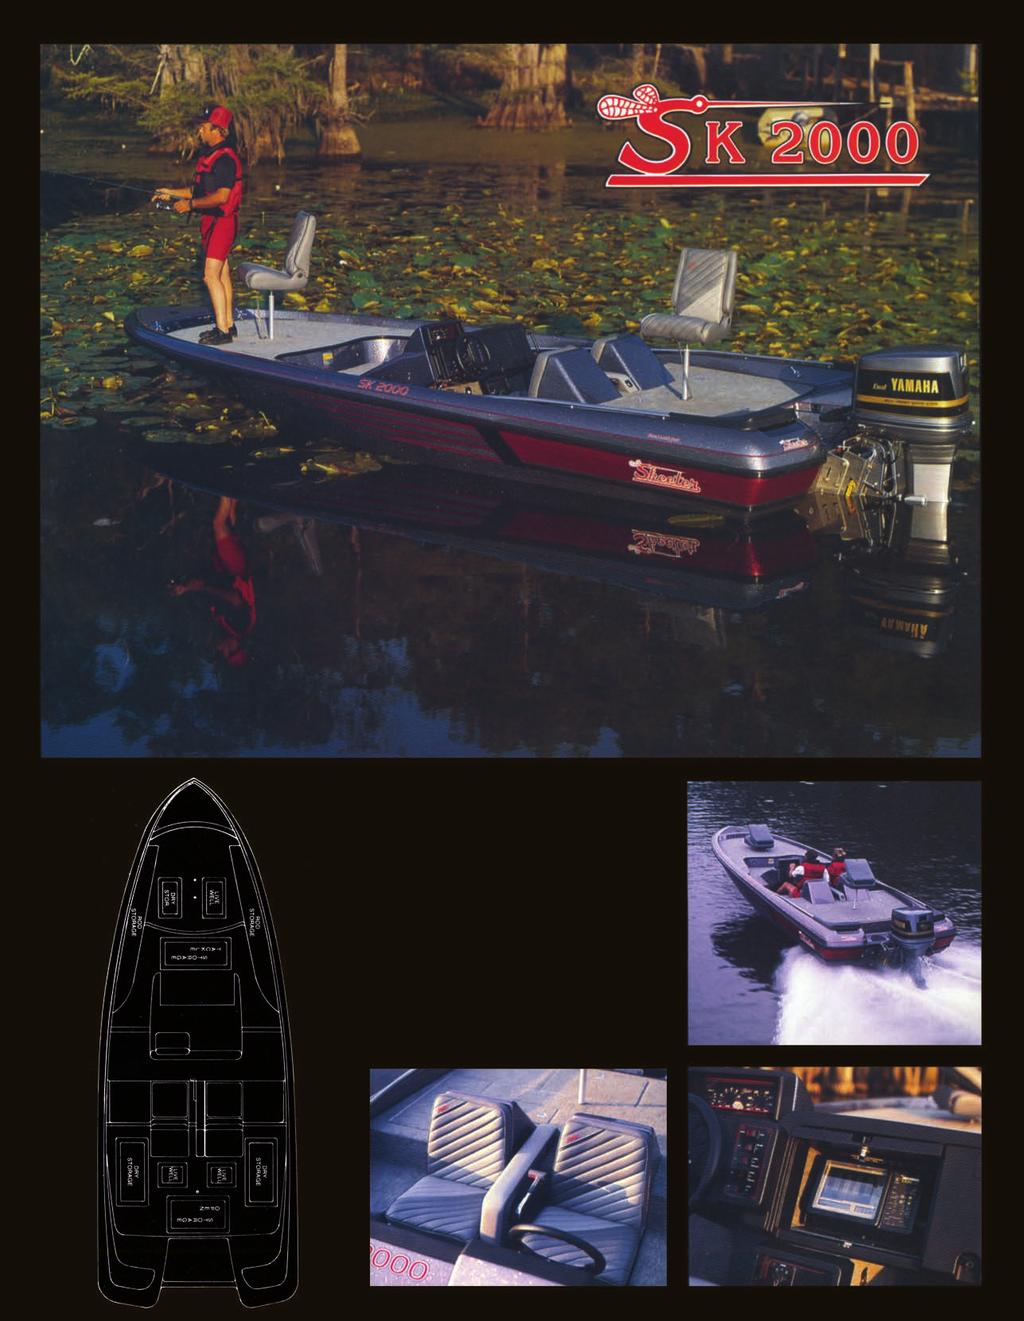 T he SK2000 is the most talked about boat in the boating industry today.